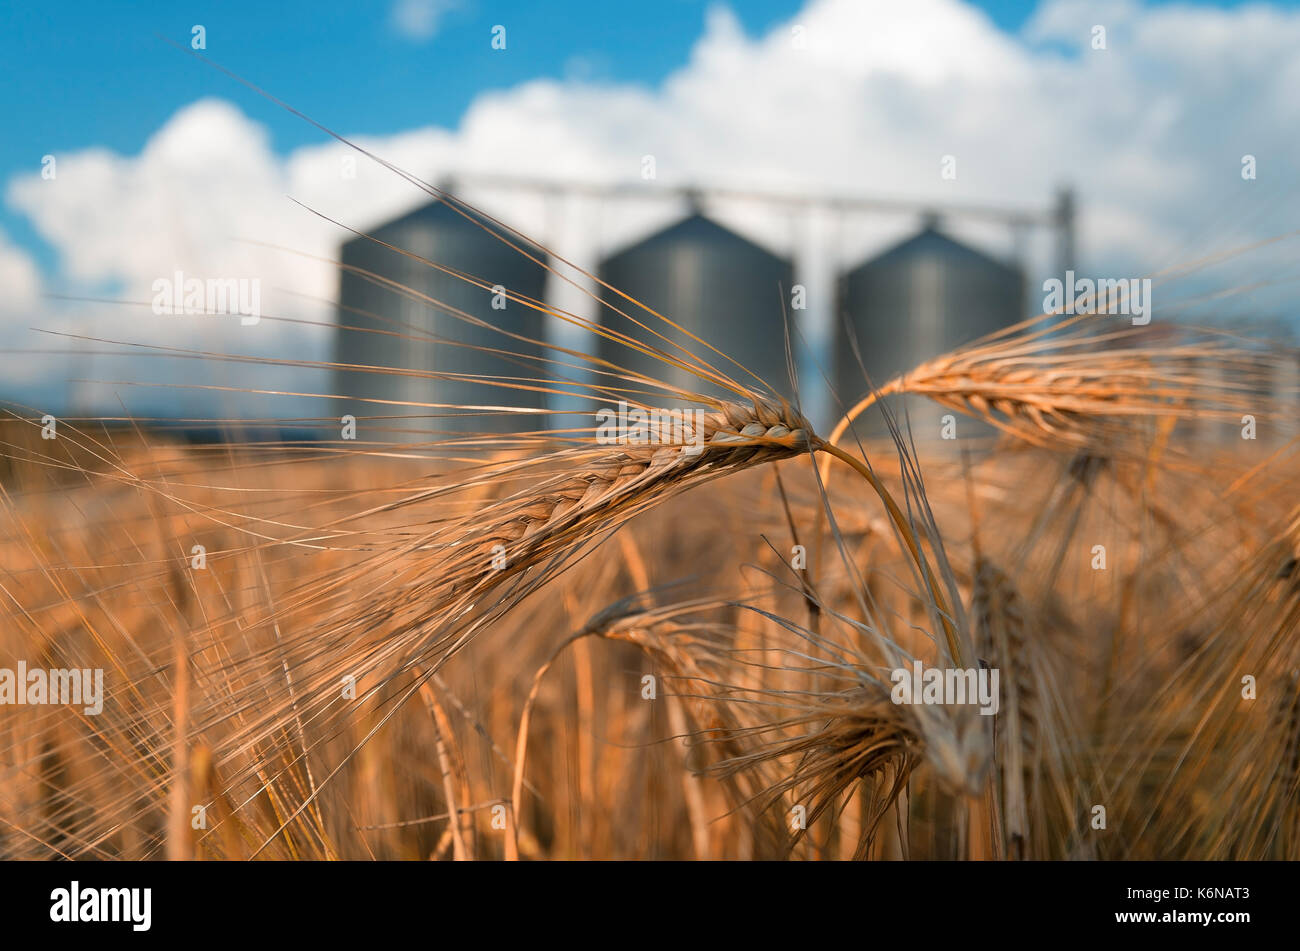 field with grain silos for agriculture Stock Photo